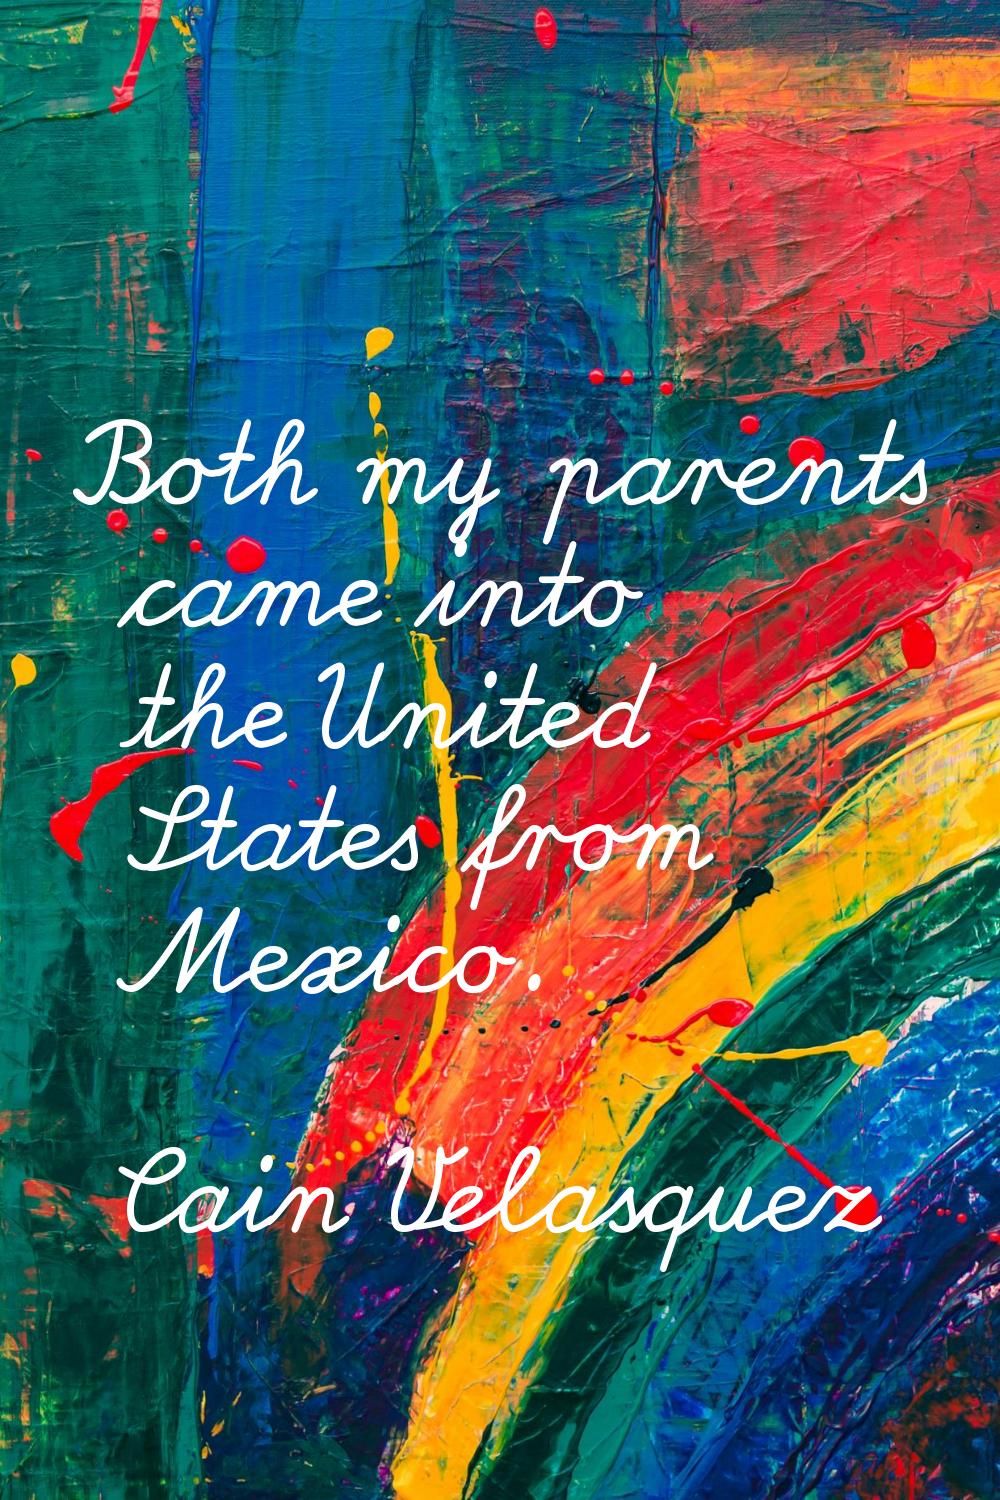 Both my parents came into the United States from Mexico.